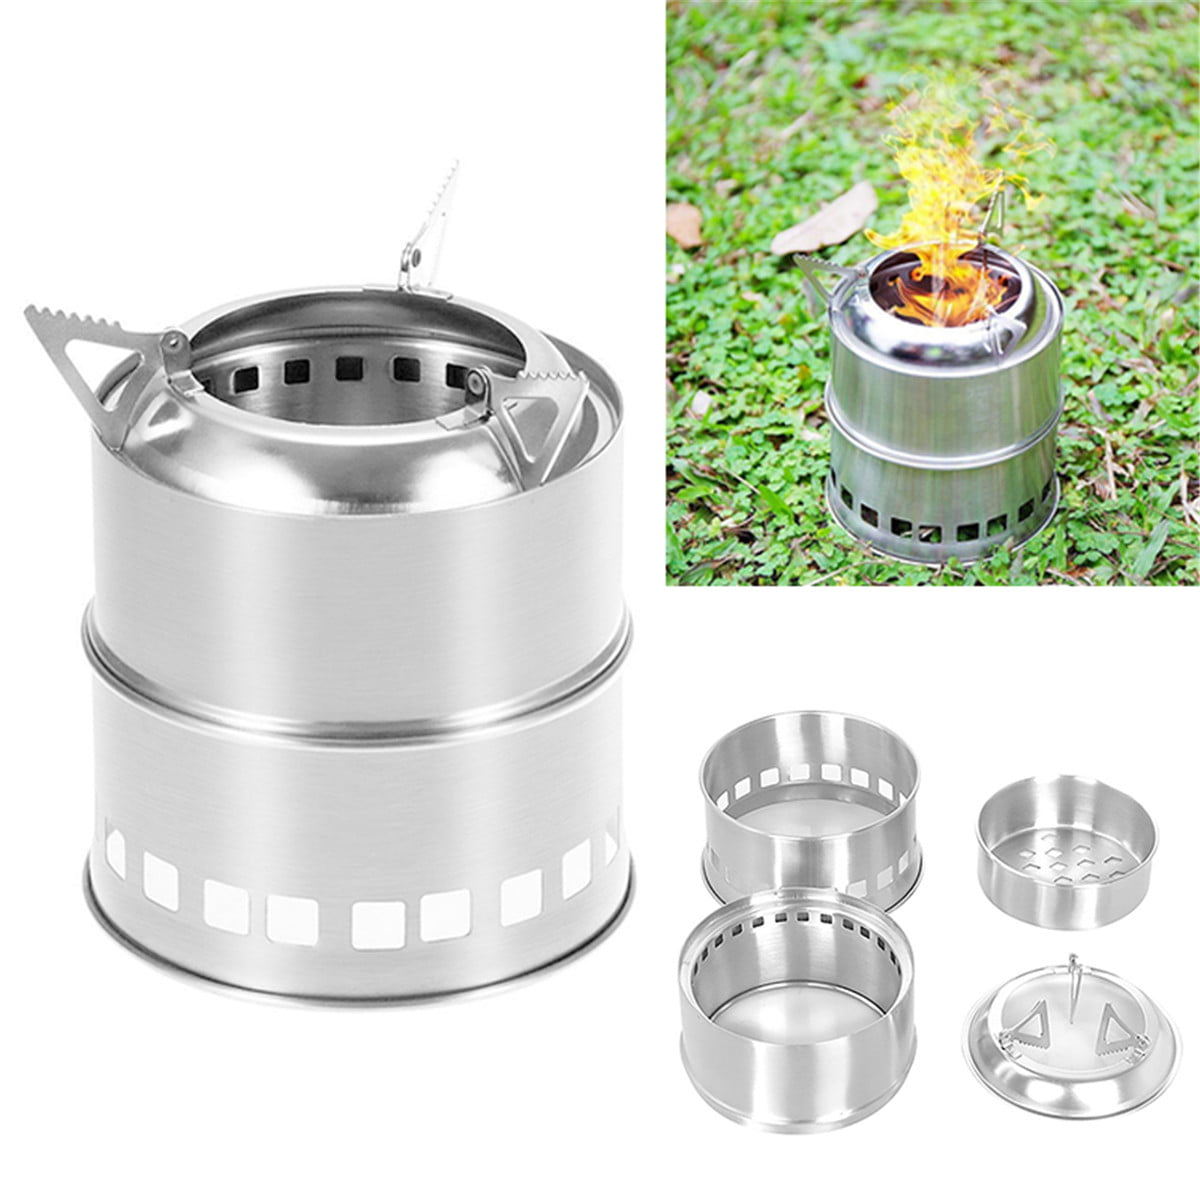 US Outdoor Wood Stove Backpacking Portable Survival Wood Burning Camping Stove